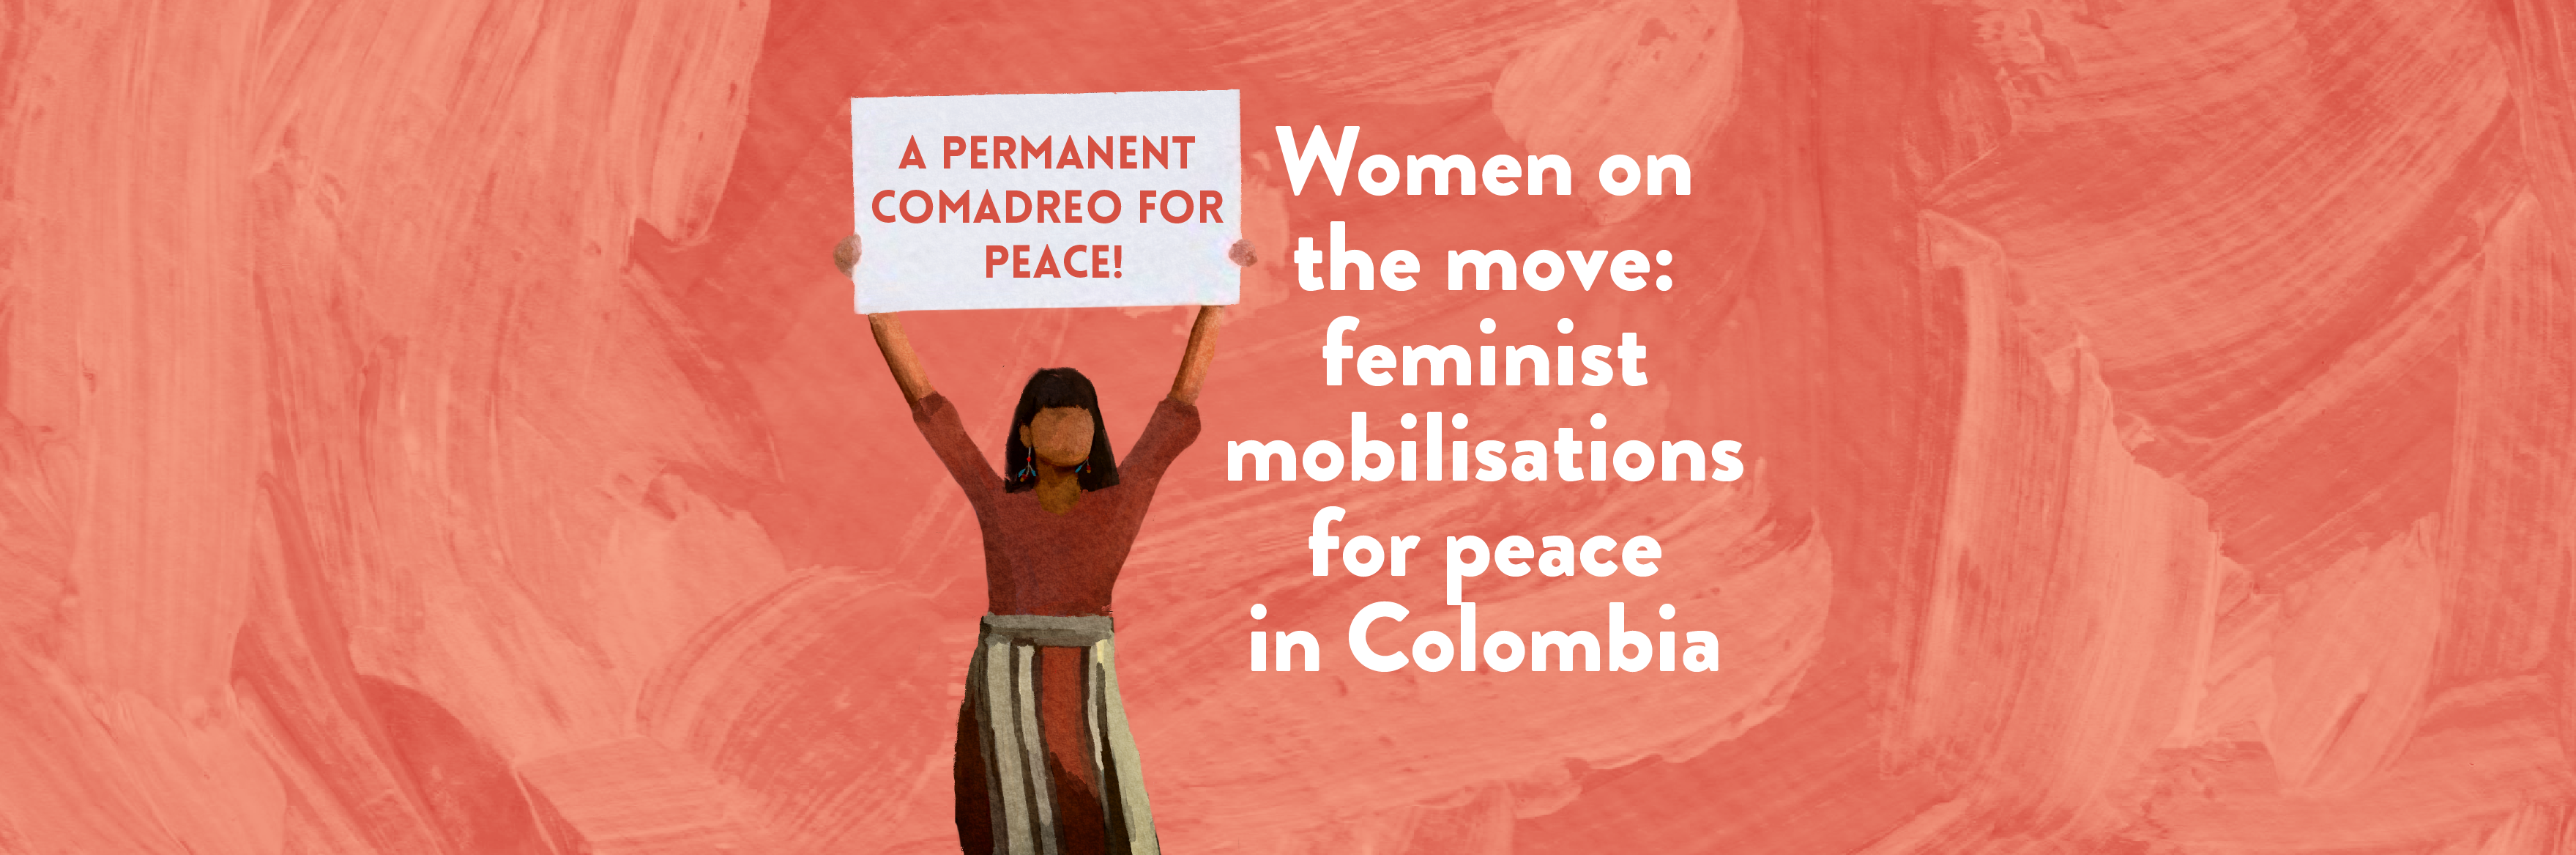 Women on the move: feminist mobilisations for peace in Colombia 